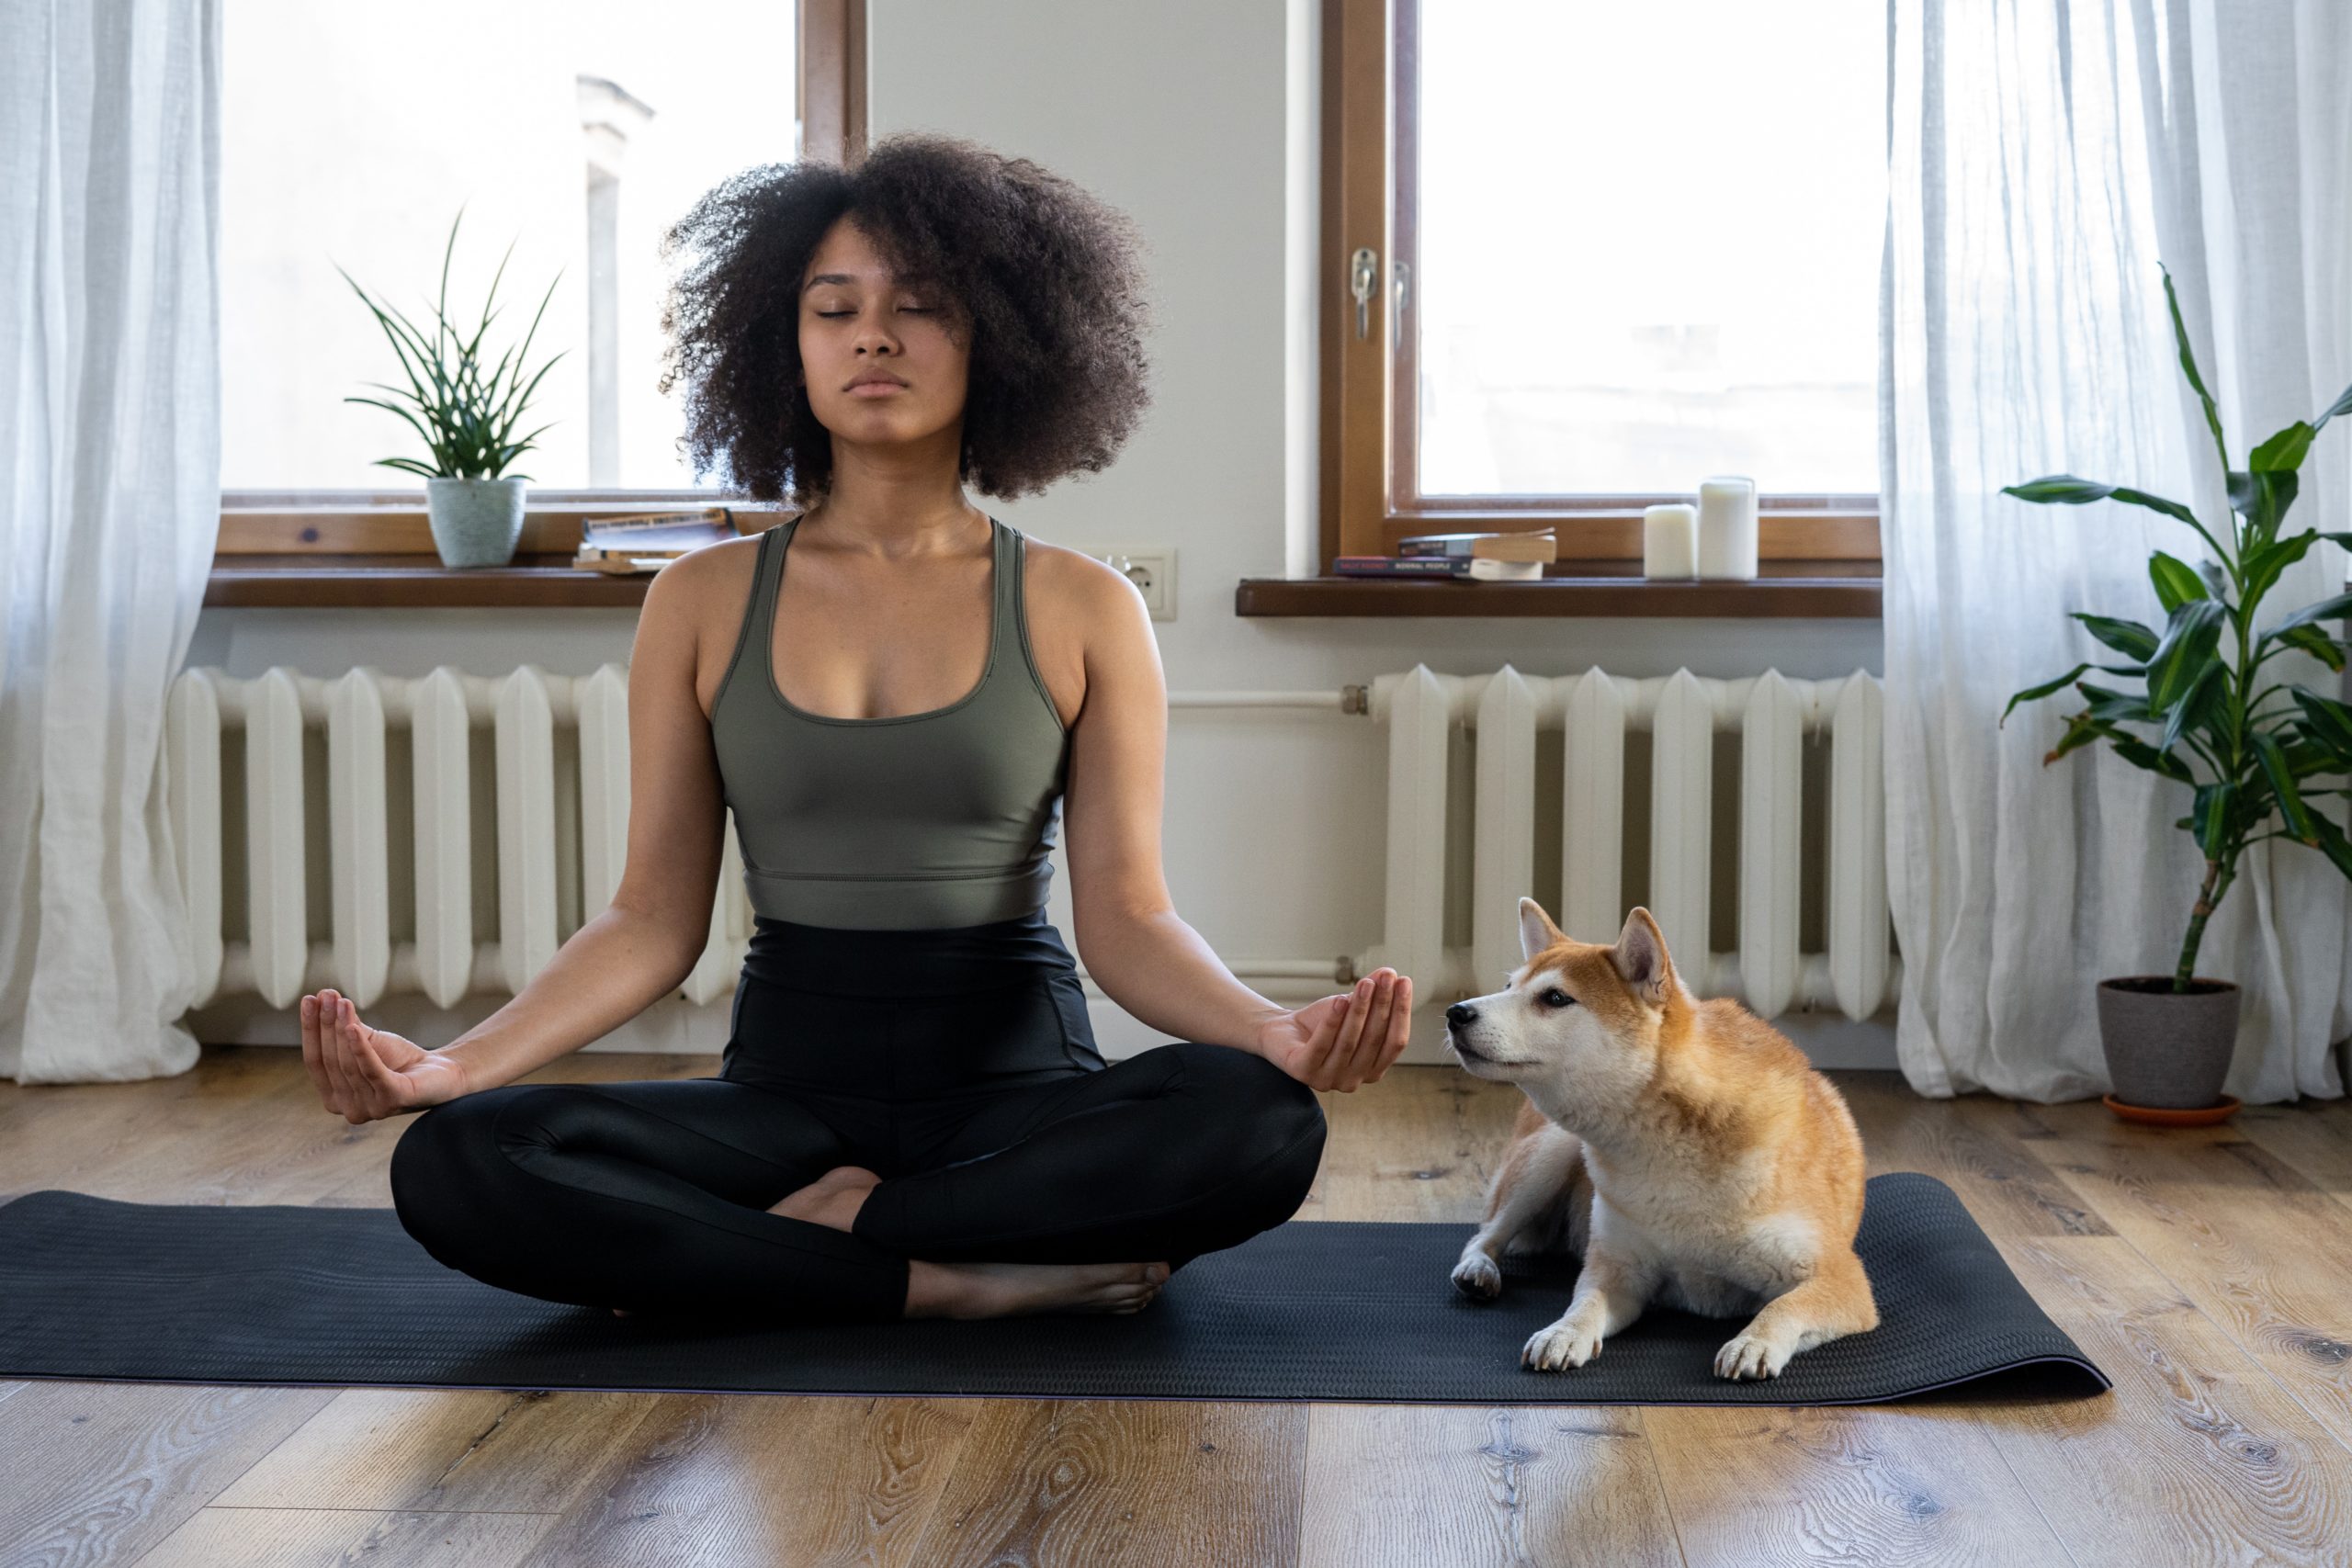 Woman practicing yoga in her apartment with her dog sitting next to her